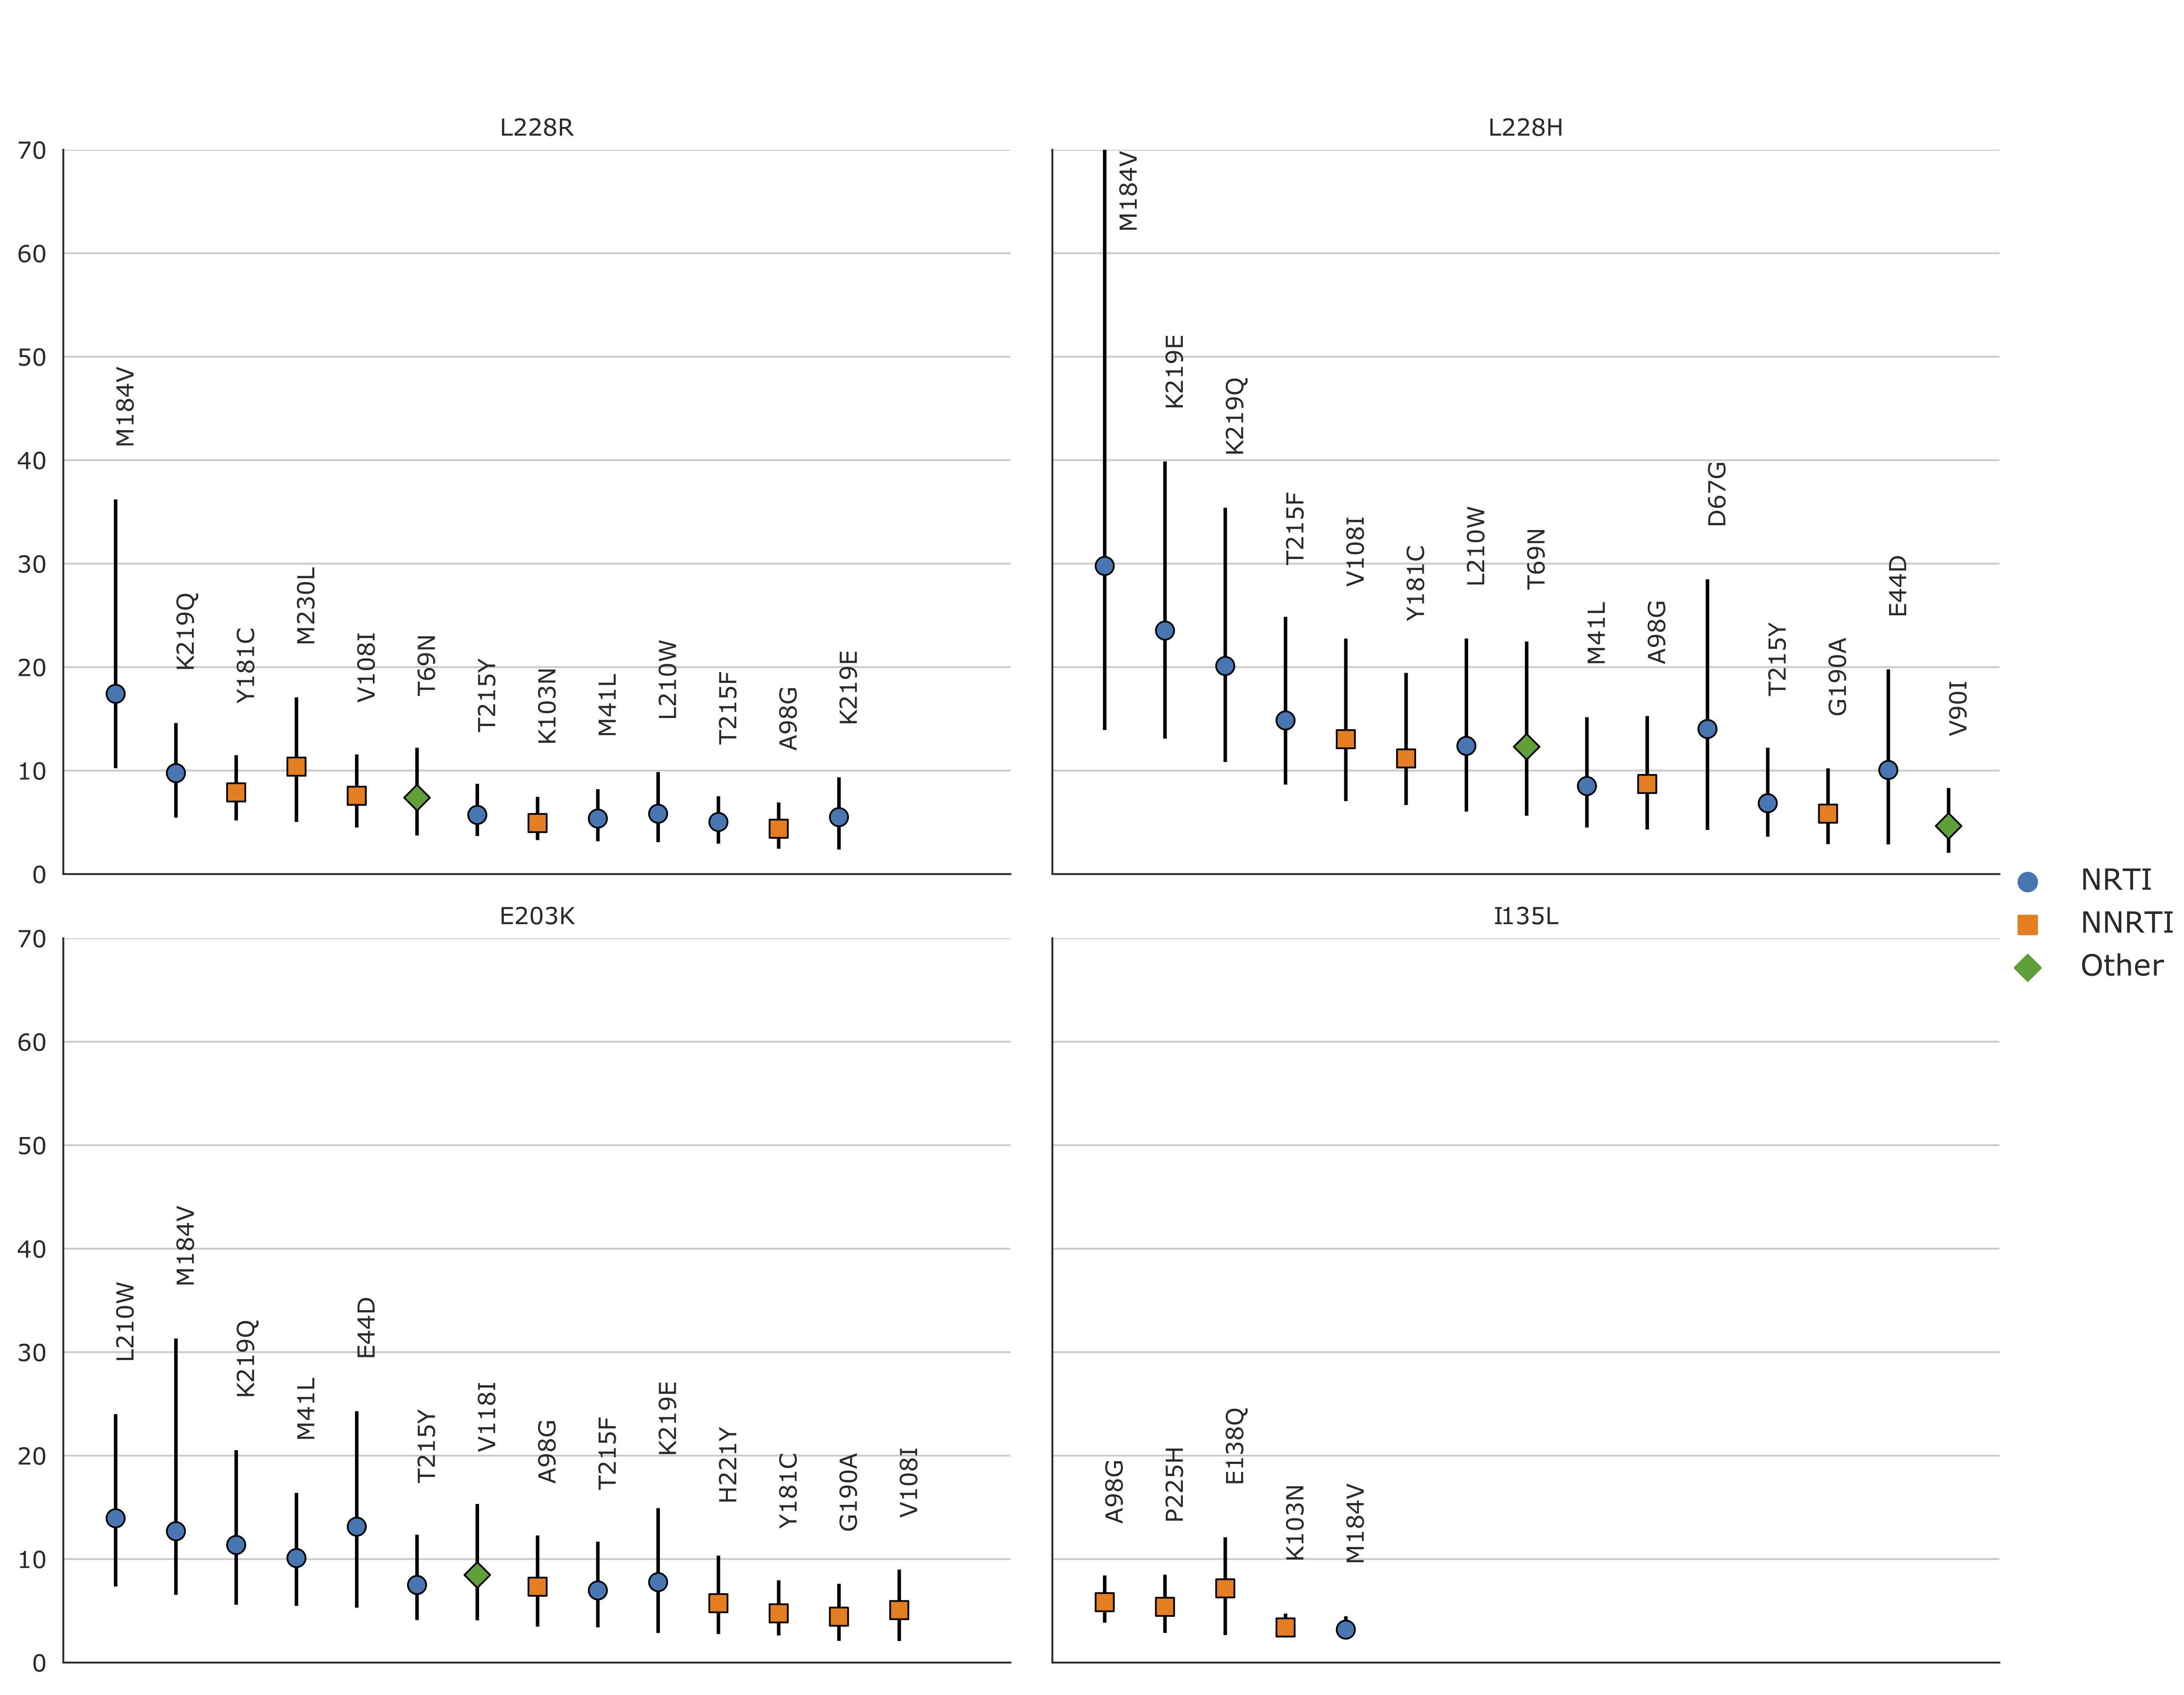 **Relative risks of the new mutations with regards to known RAMs on the
African dataset**  
(i.e. the prevalence of the new mutation in sequences
with a given RAM divided by the prevalence of the new mutation in
sequences without the RAM). RRs were only computed for mutations (new
and RAMs) that appeared in at least 30 sequences, which is why RRs were
not computed for H208Y and D218E. 95% confidence intervals, represented
by vertical bars, were computed with 1000 bootstrap samples of the
African sequences. Only RRs with a lower CI boundary greater than 2 are
shown. The shape and color of the point represents the type of RAM as
defined by Stanford's HIVDB. Blue circle: NRTI, orange square: NNRTI,
green diamond: Other. For the RR of L228H with regards to M184V, the
upper CI bound is infinite. The new RAMs have high RR values for known
RAMs similar to those obtained on the UK dataset. We also arrive at
similar conclusions, I135L being associated with NNRTIs, E203K and L228H
to NRTI and L228R to both. RR values are shown from left to right, by
order of decreasing values on the lower bound of the 95% CI.